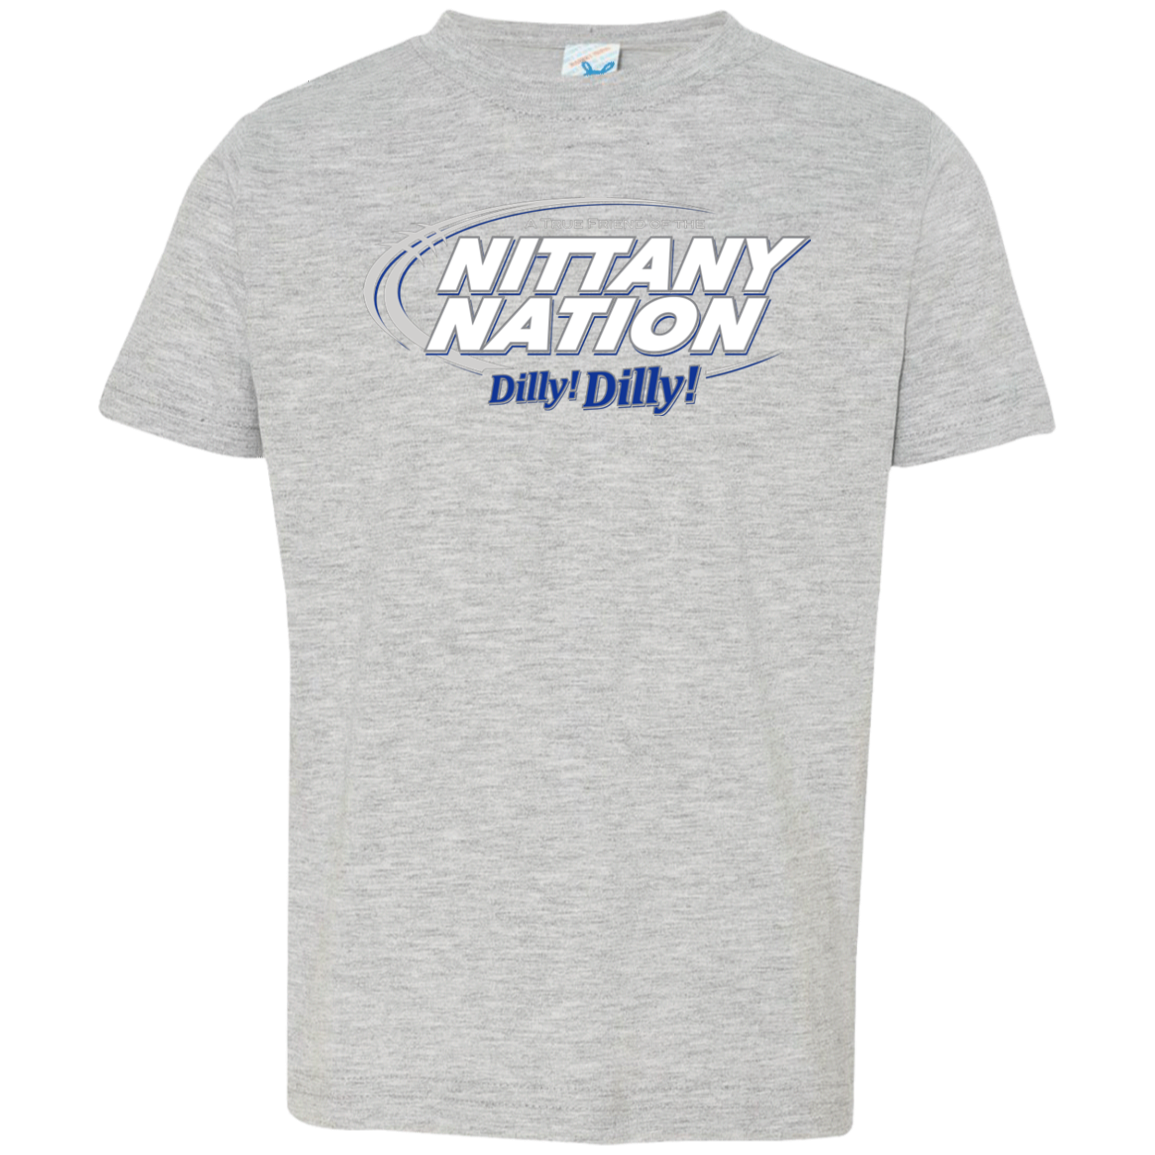 Penn State Dilly Dilly Toddler Premium T-Shirt